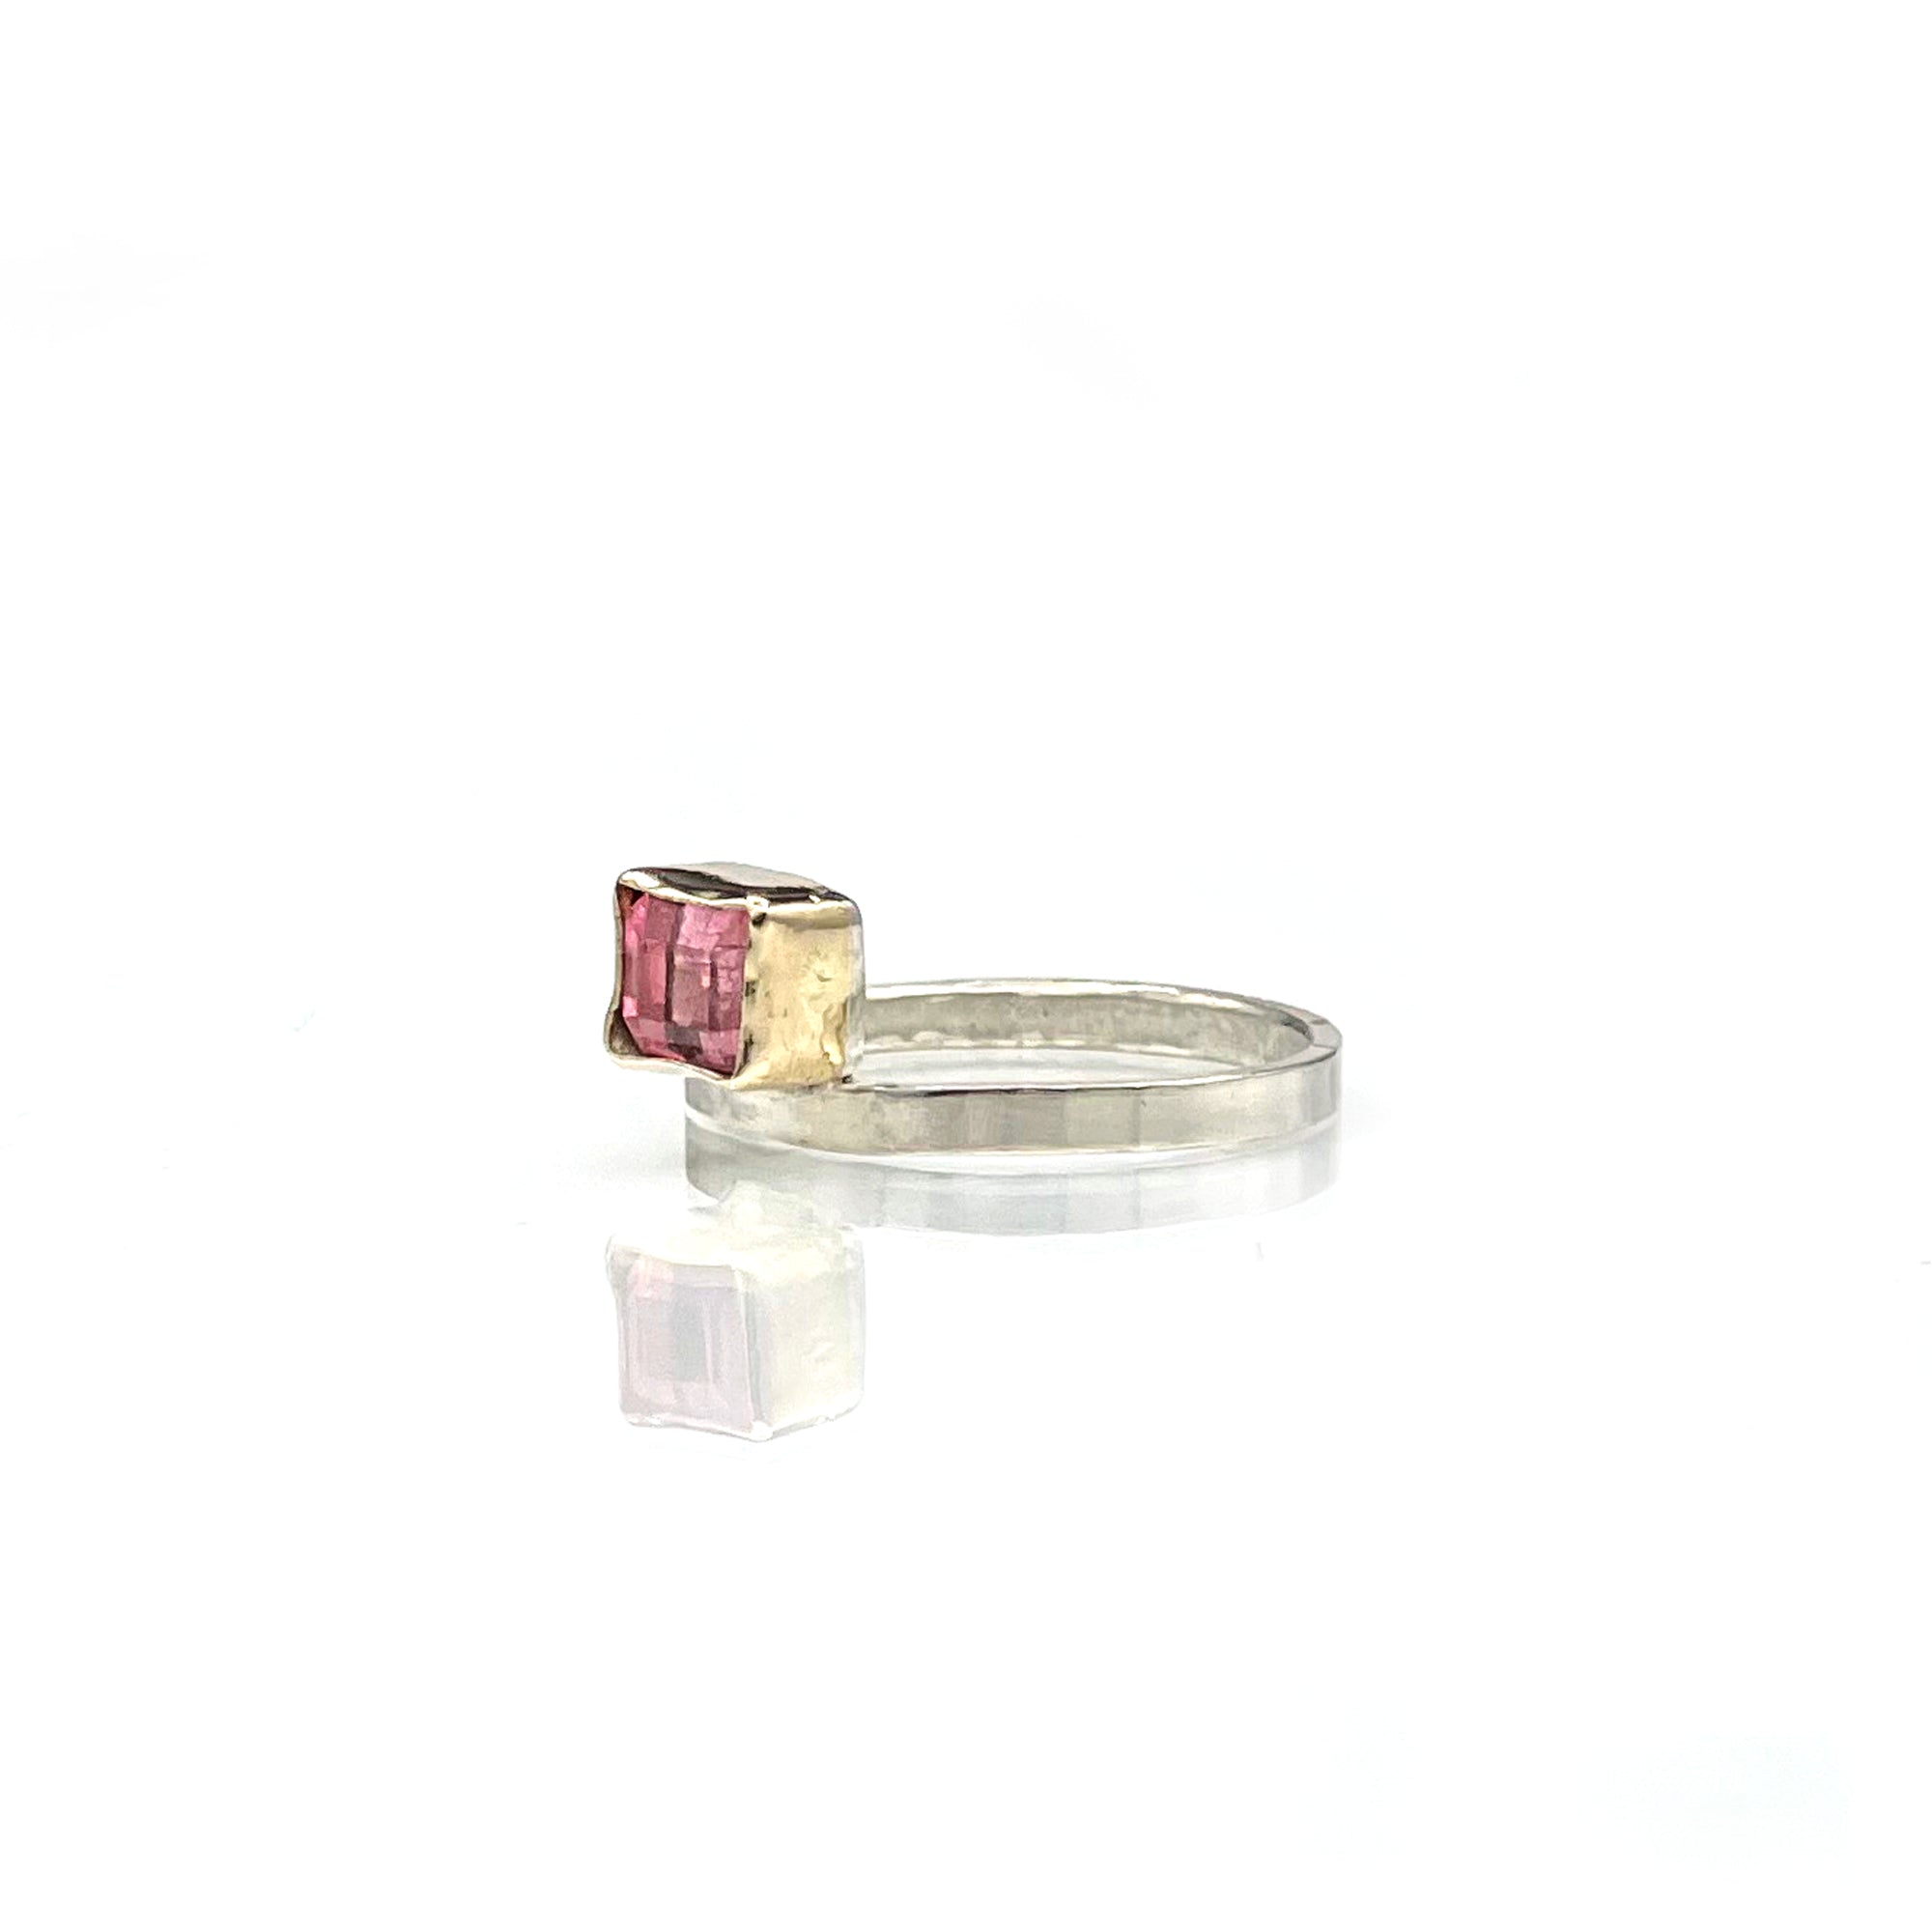 Pink Tourmaline Ring, Geometric Stacking Ring, Sterling and 14K SOLID Gold